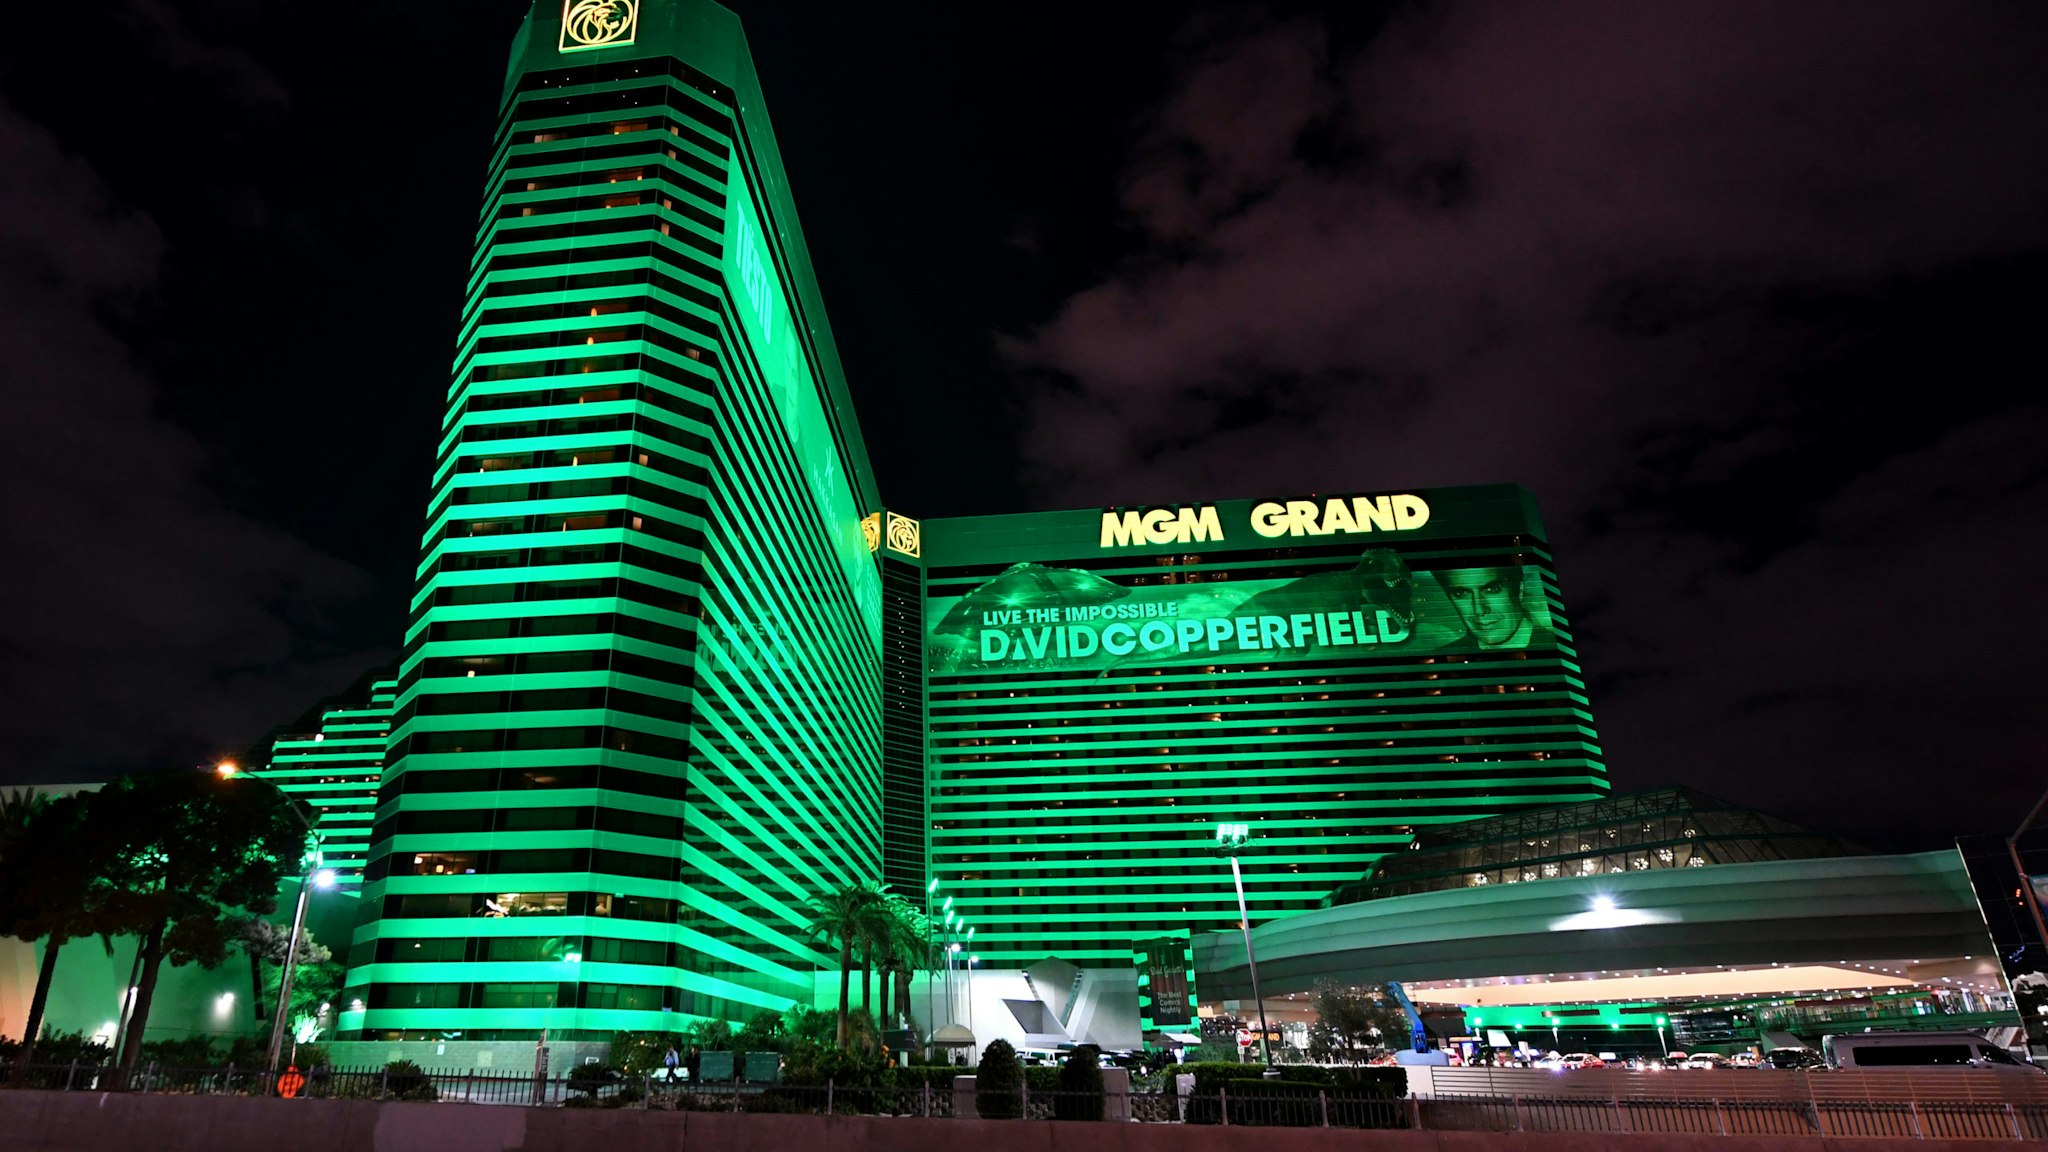 LAS VEGAS, NEVADA - MARCH 14: An exterior view shows MGM Grand & Hotel & Casino as the coronavirus continues to spread across the United States on March 14, 2020 in Las Vegas, Nevada. Several employees at MGM Resorts International hotel-casinos on the Las Vegas Strip have tested presumptive positive for COVID-19. MGM Resorts International employees who can will start working from home next week. MGM has closed all nightclubs, dayclubs, buffets, spas, gyms and salons at its properties in Las Vegas and on Monday, it will close 150 food and beverage outlets and furloughs and layoffs will begin. The World Health Organization declared the coronavirus (COVID-19) a global pandemic on March 11th. (Photo by Ethan Miller/Getty Images)